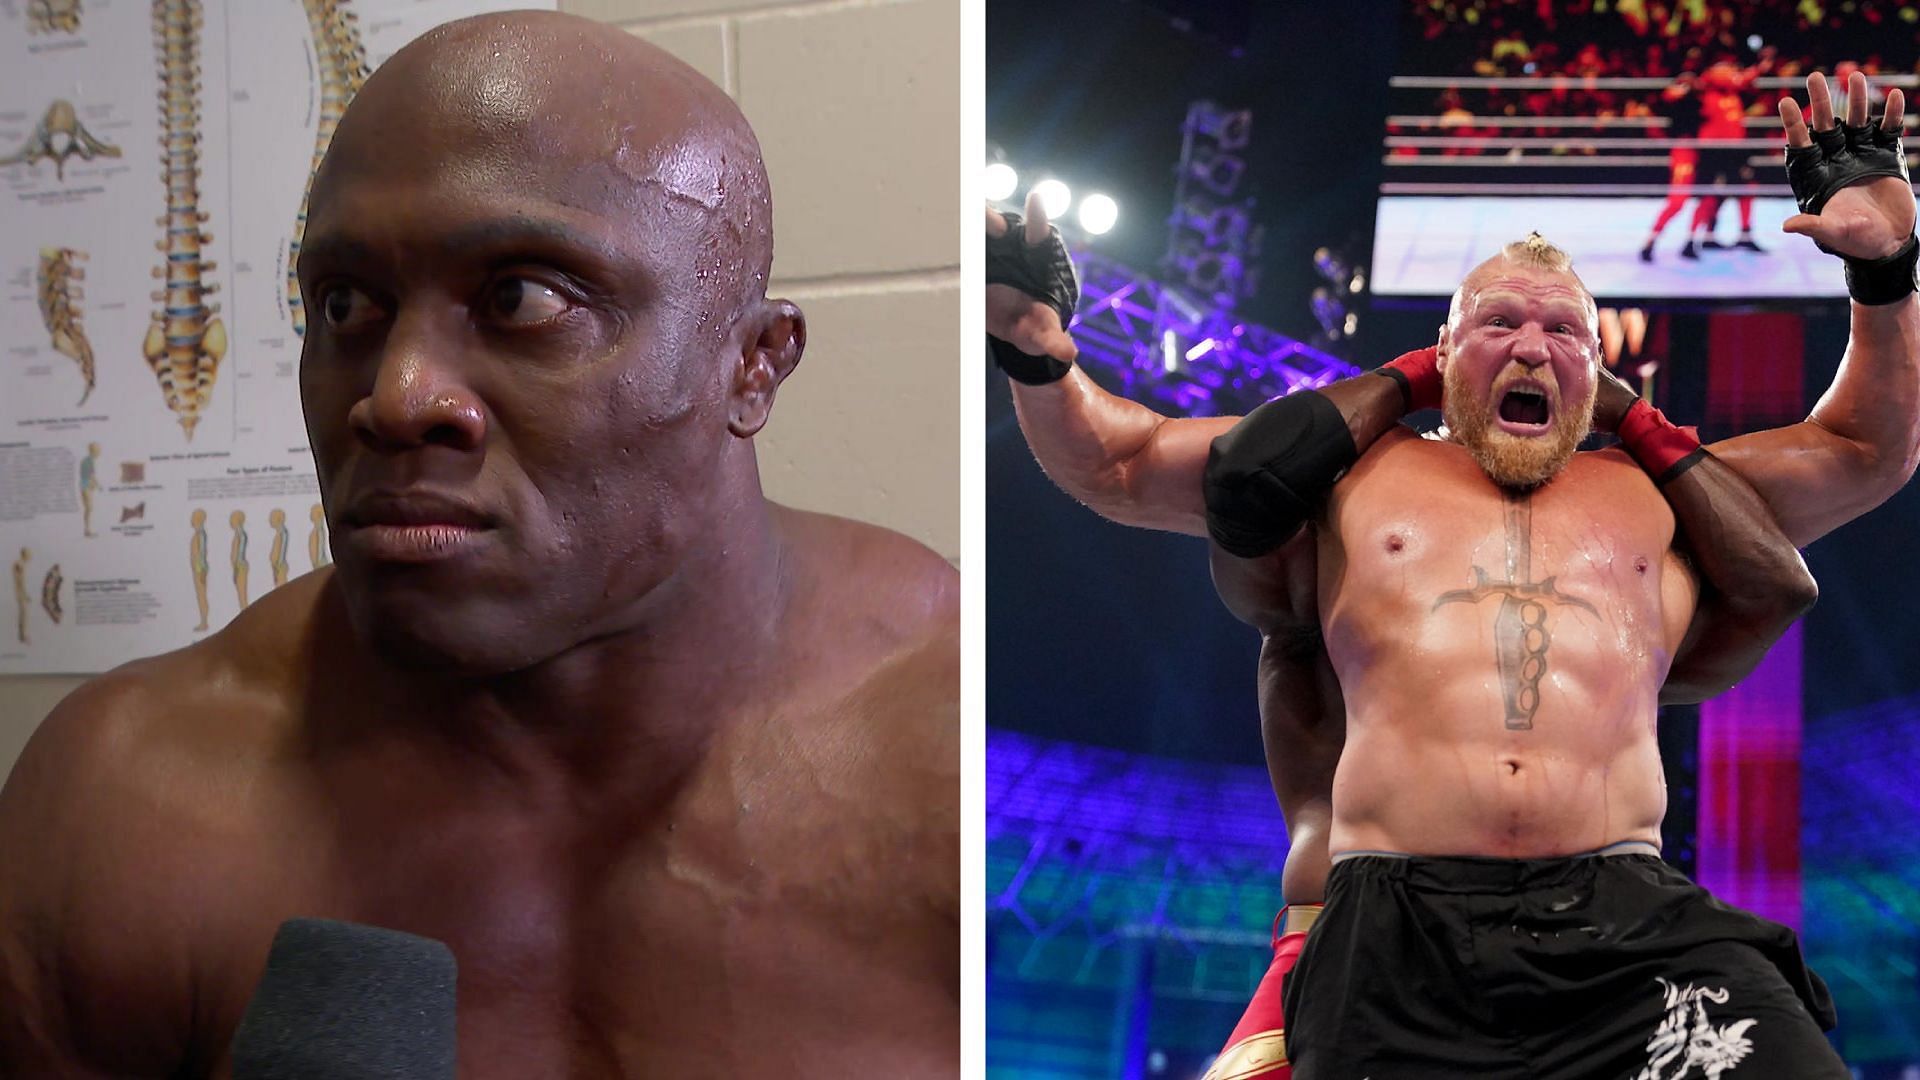 Bobby Lashley lost in an epic fight at WWE Crown Jewel 2022